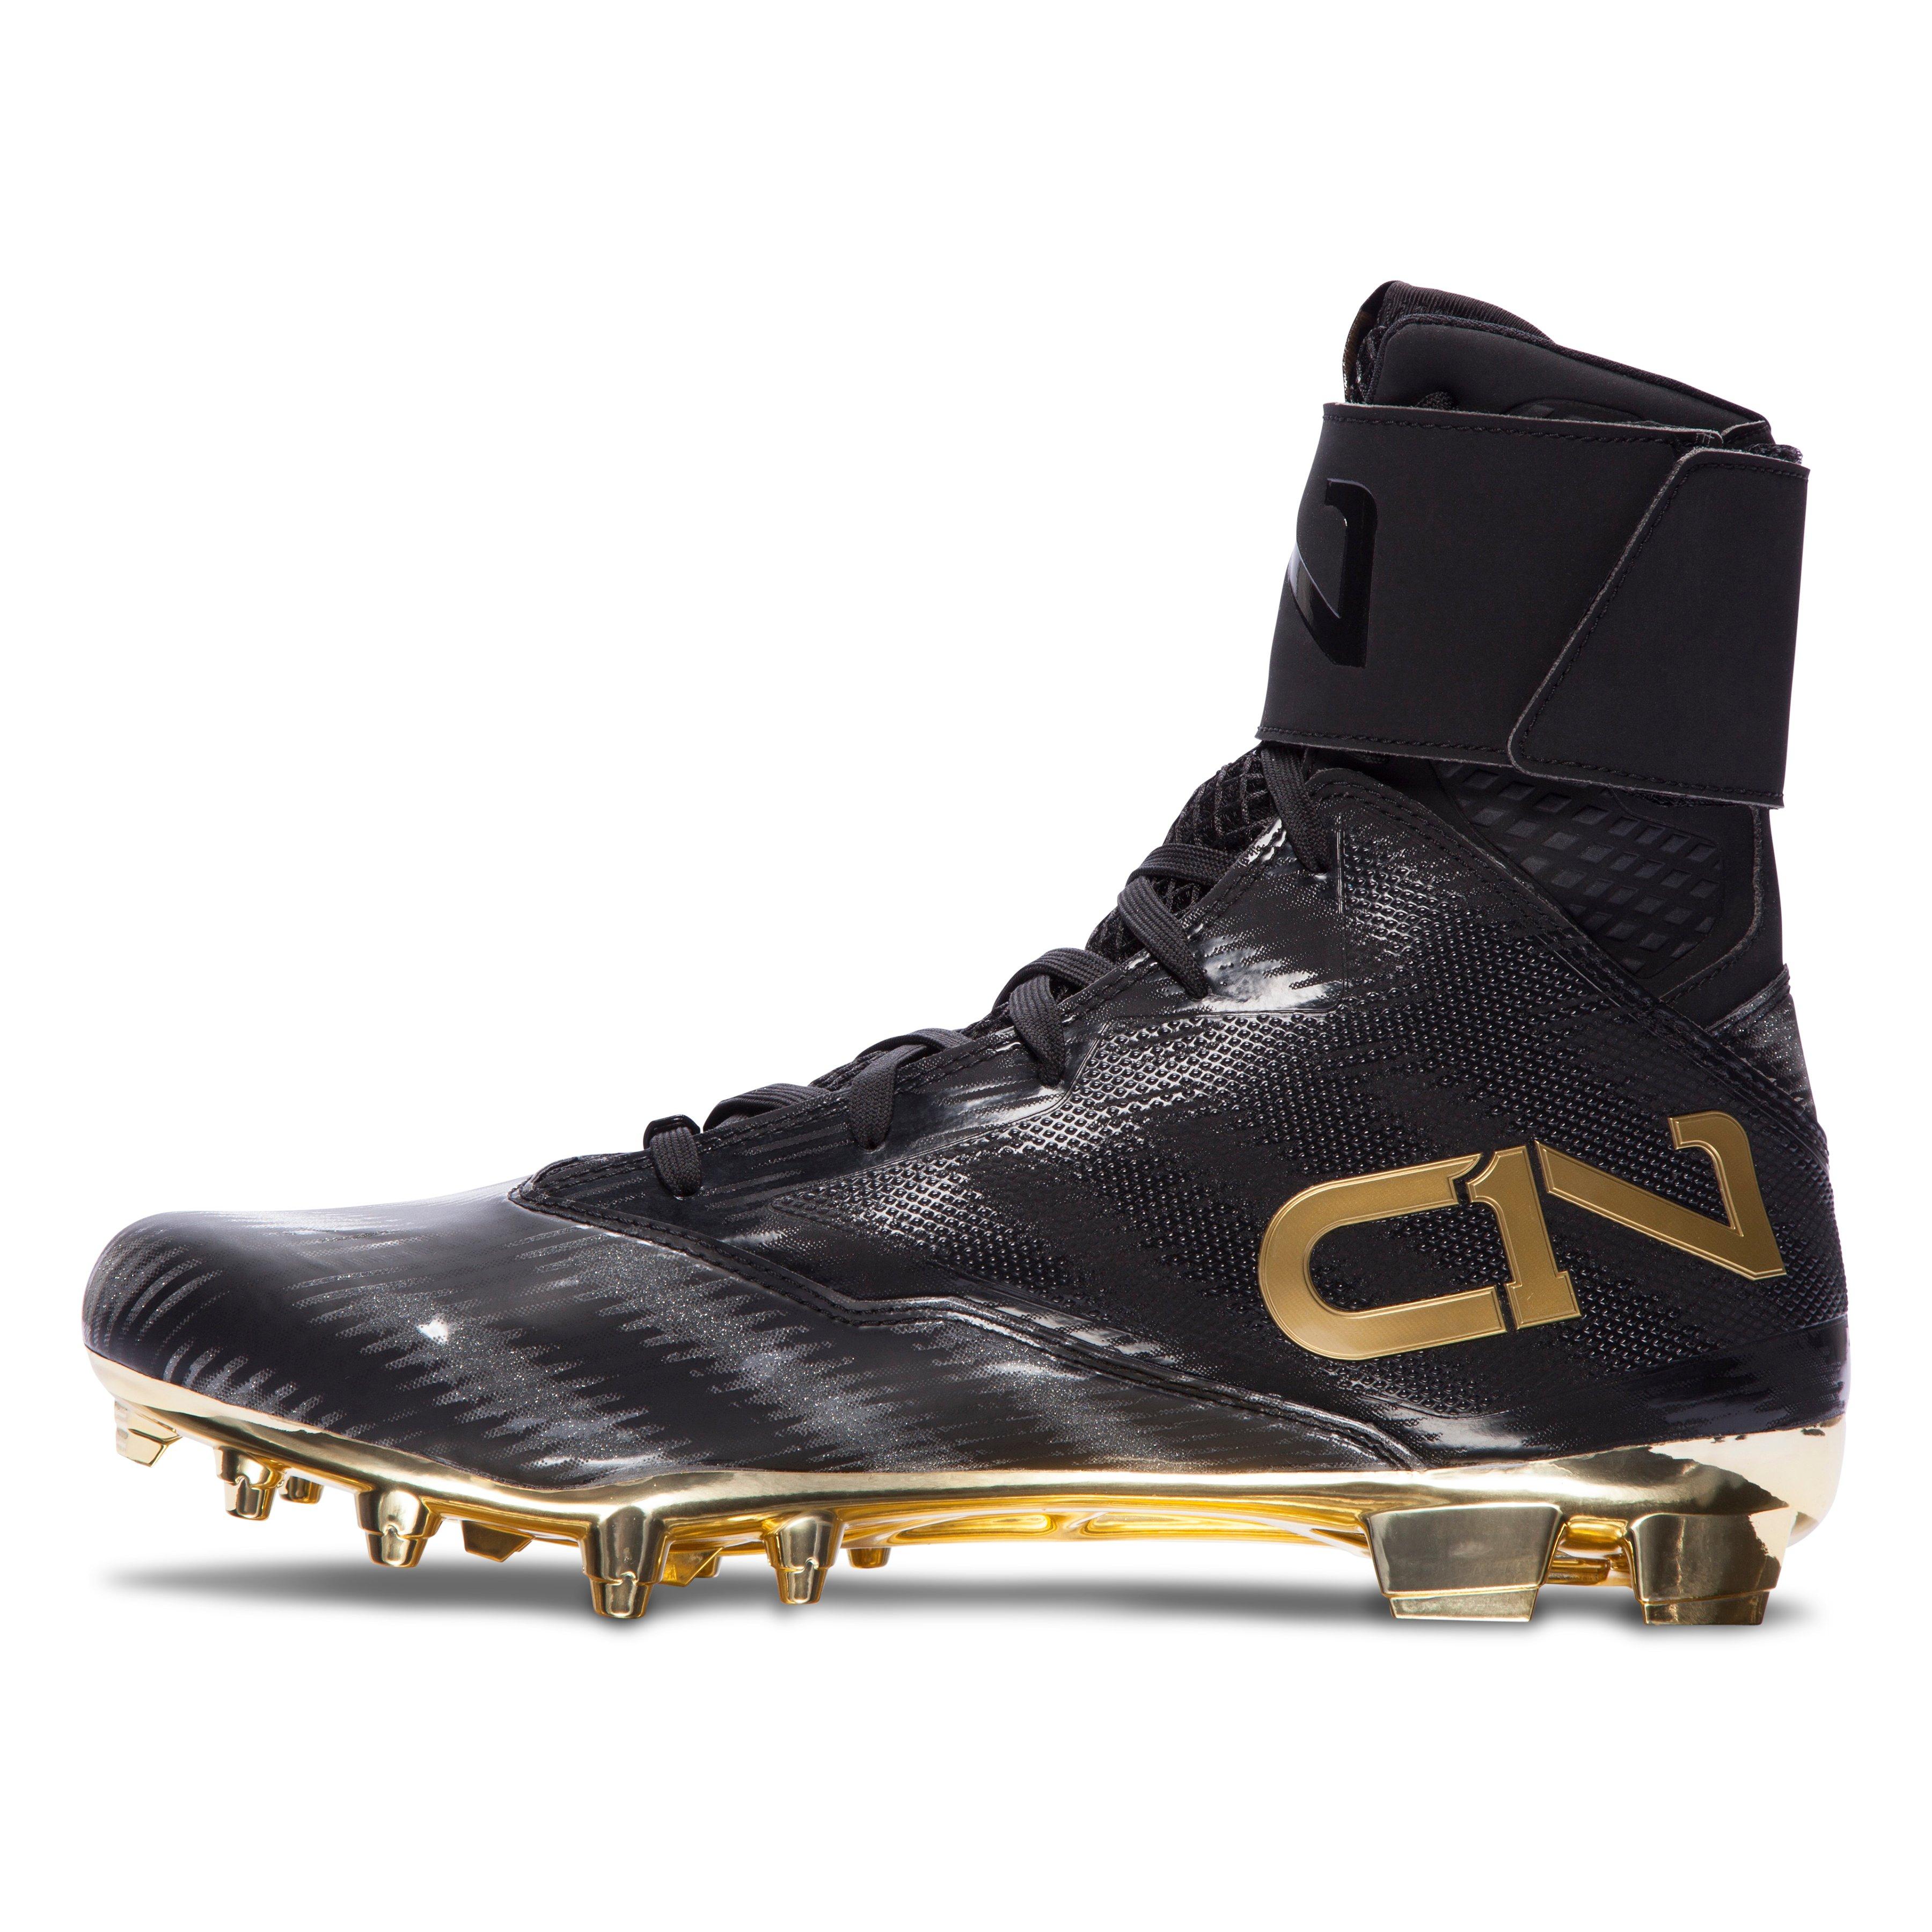 limited edition football cleats